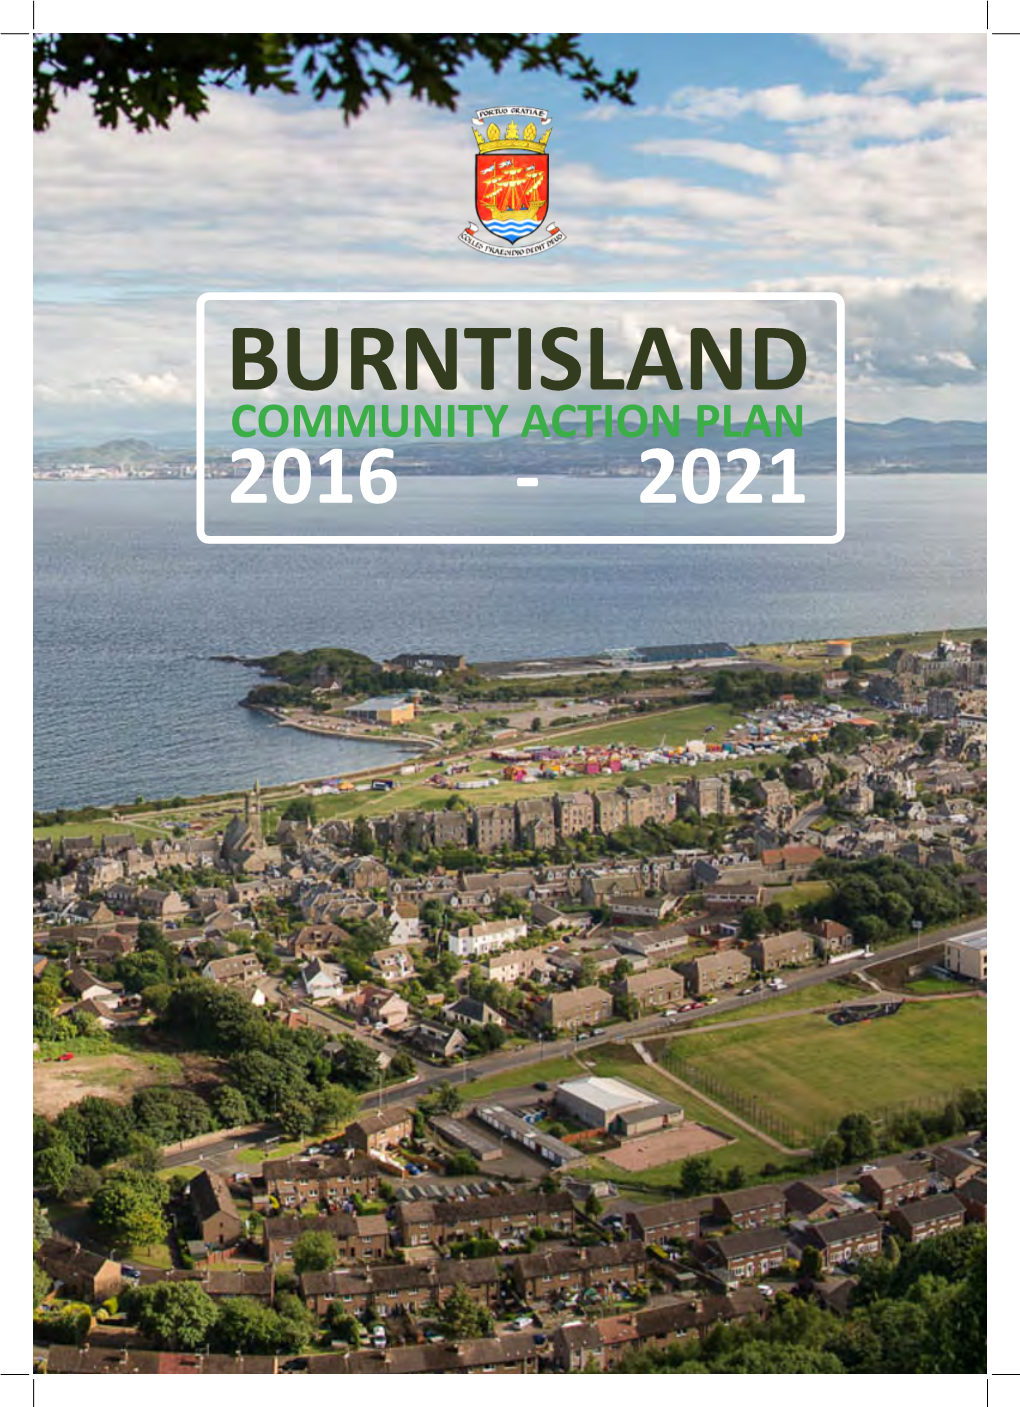 Burntisland Community Council, Local Community Groups, Businesses and Interested Local Residents